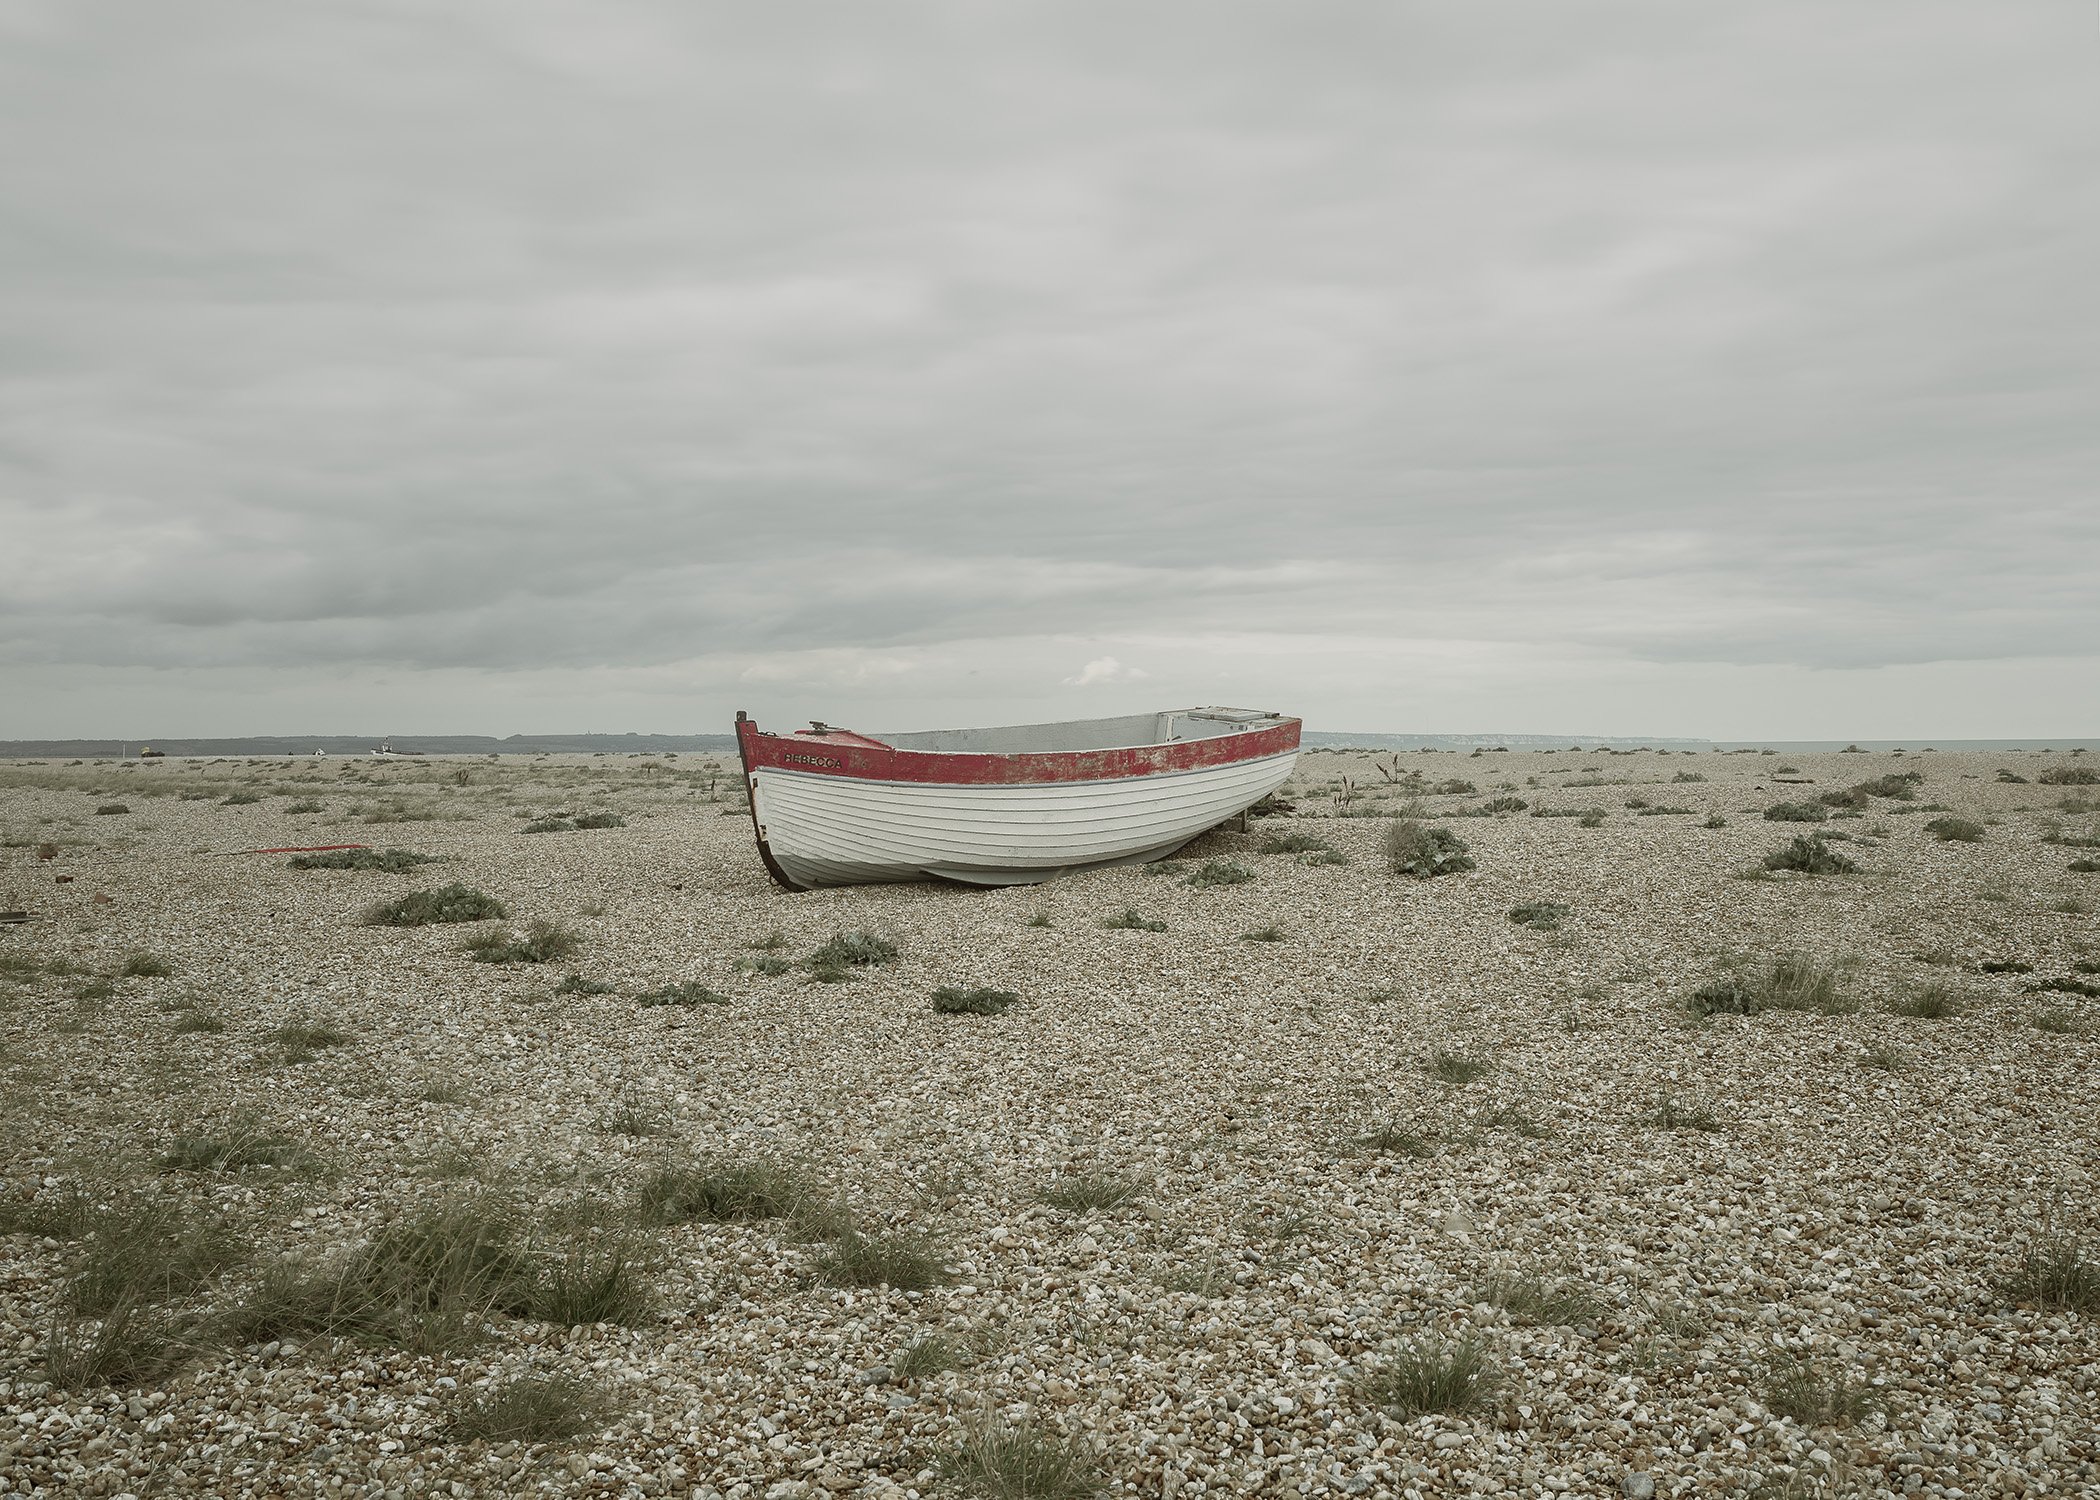  Boat, Dungeness, England, 2023 